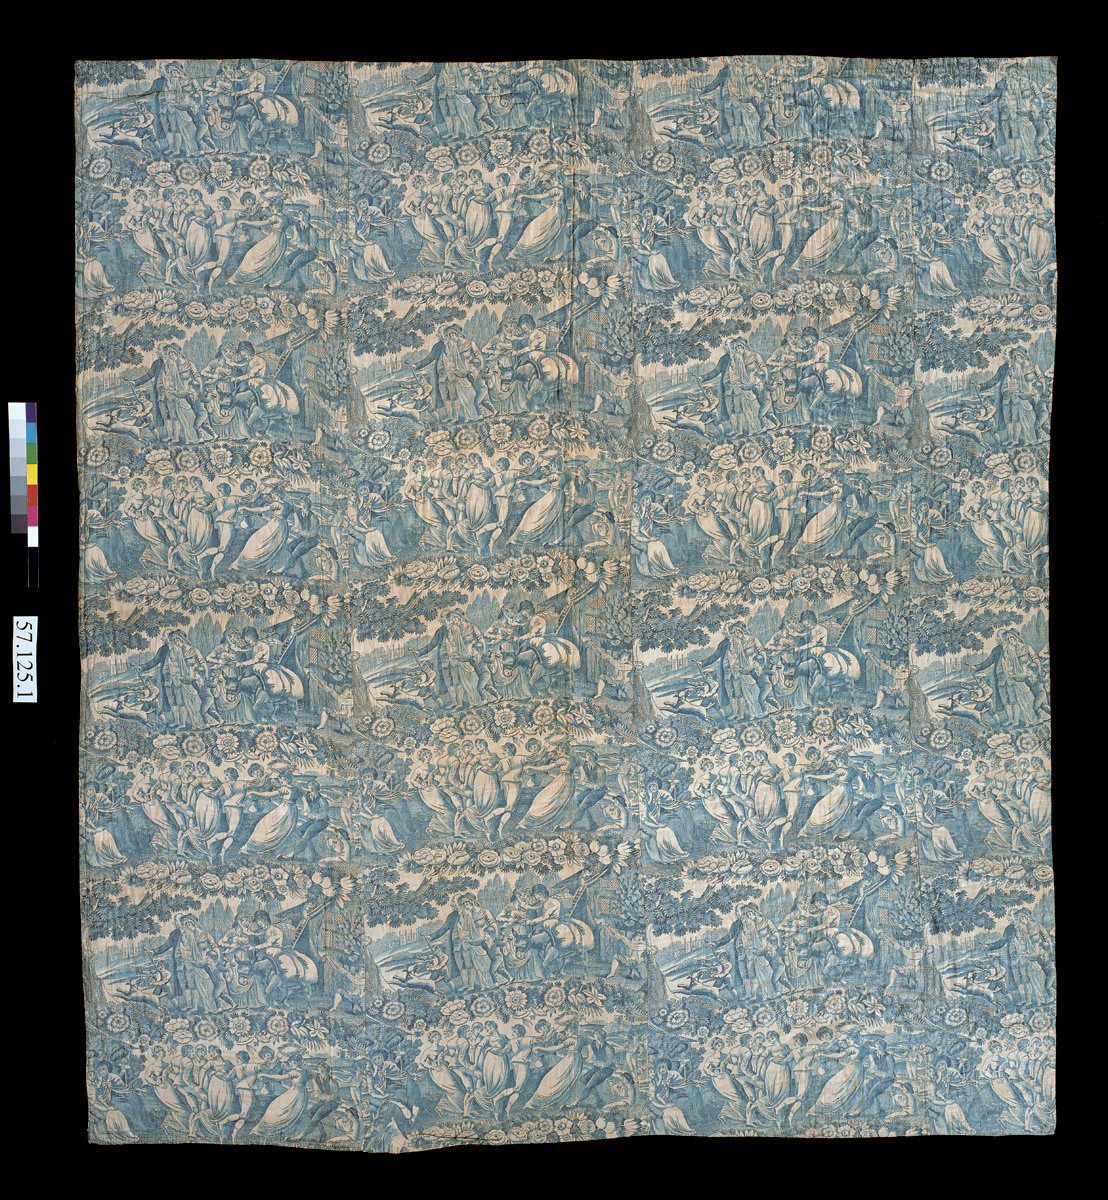 1957.0125.001 Quilt, view 1